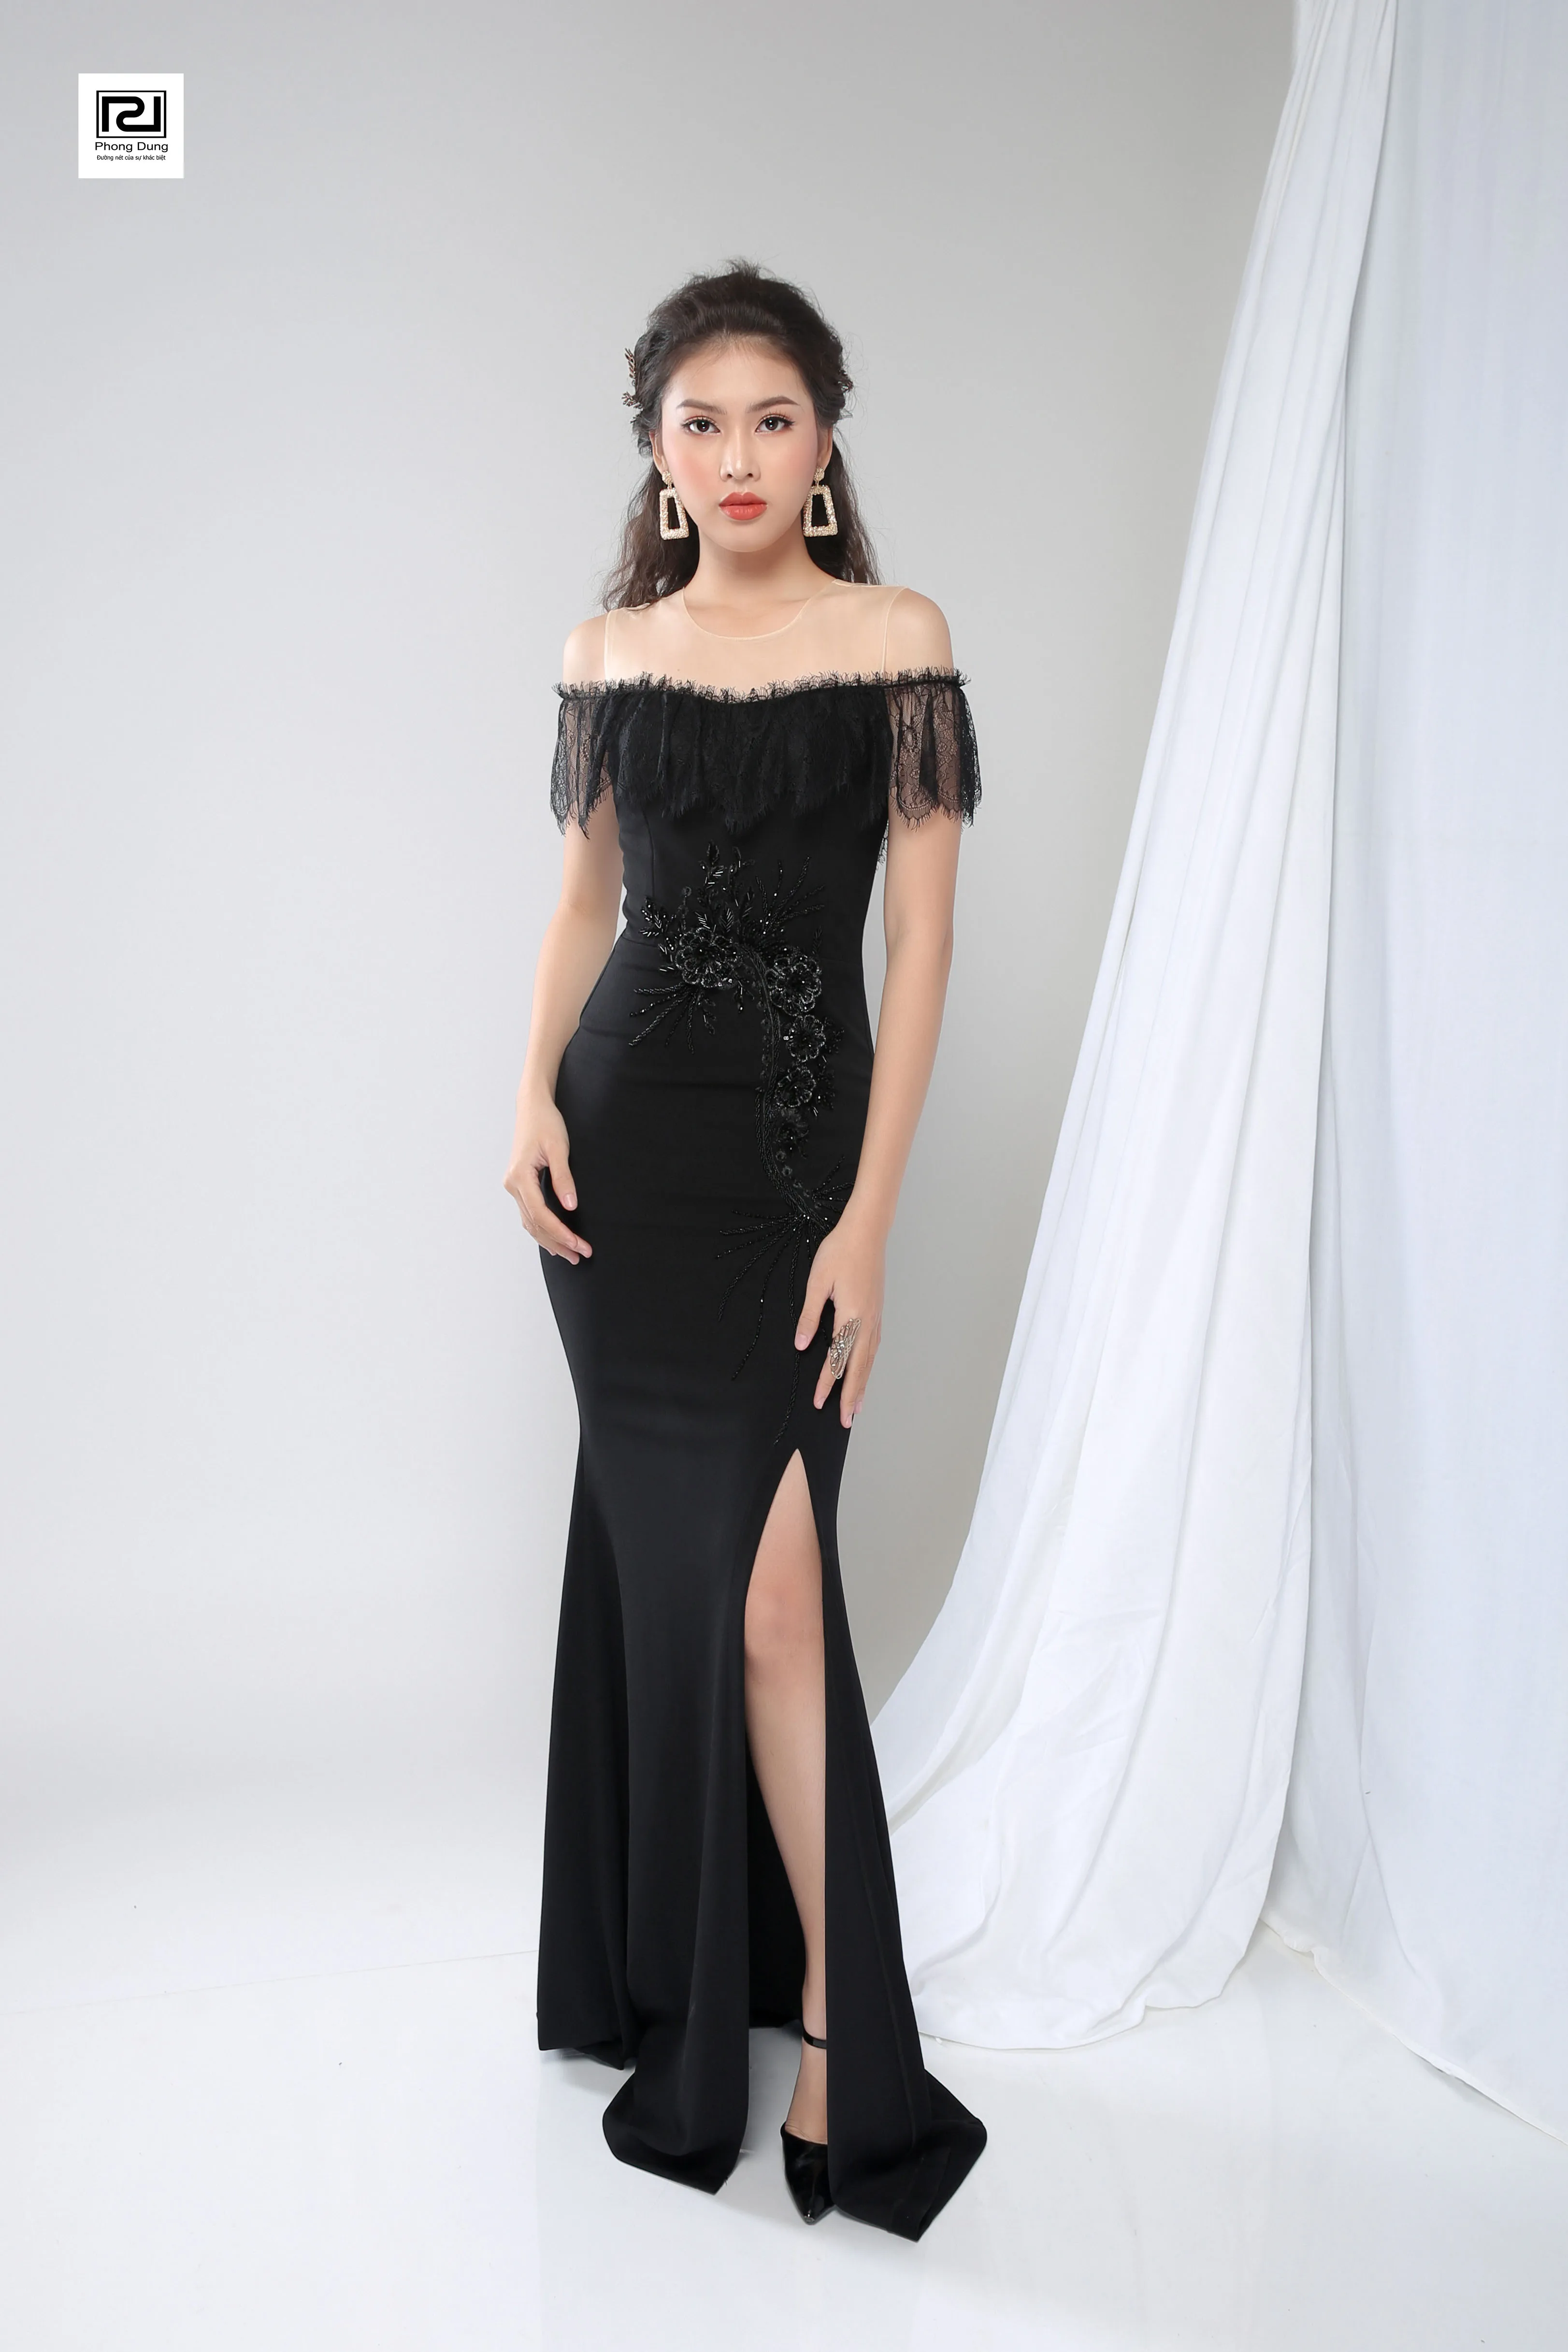 Wholesale Glamour Romantic With Hot Fashion Black Long Evening Party Dress Women